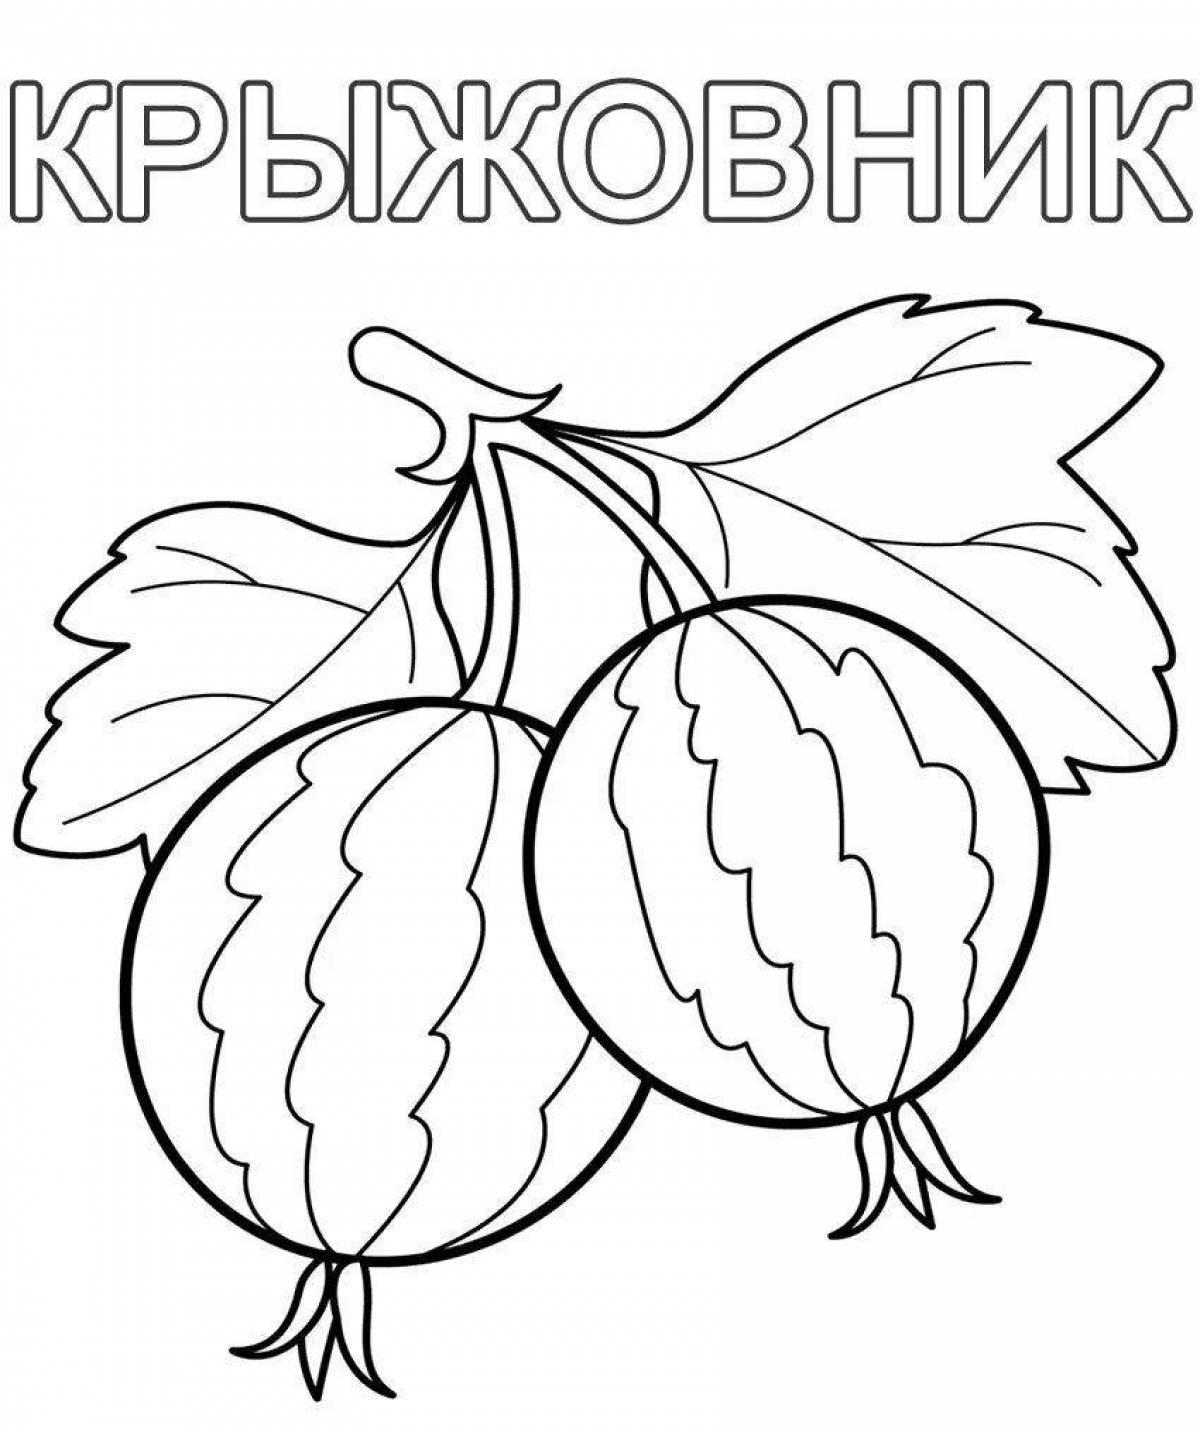 Delicious coloring pages with fruits and vegetables